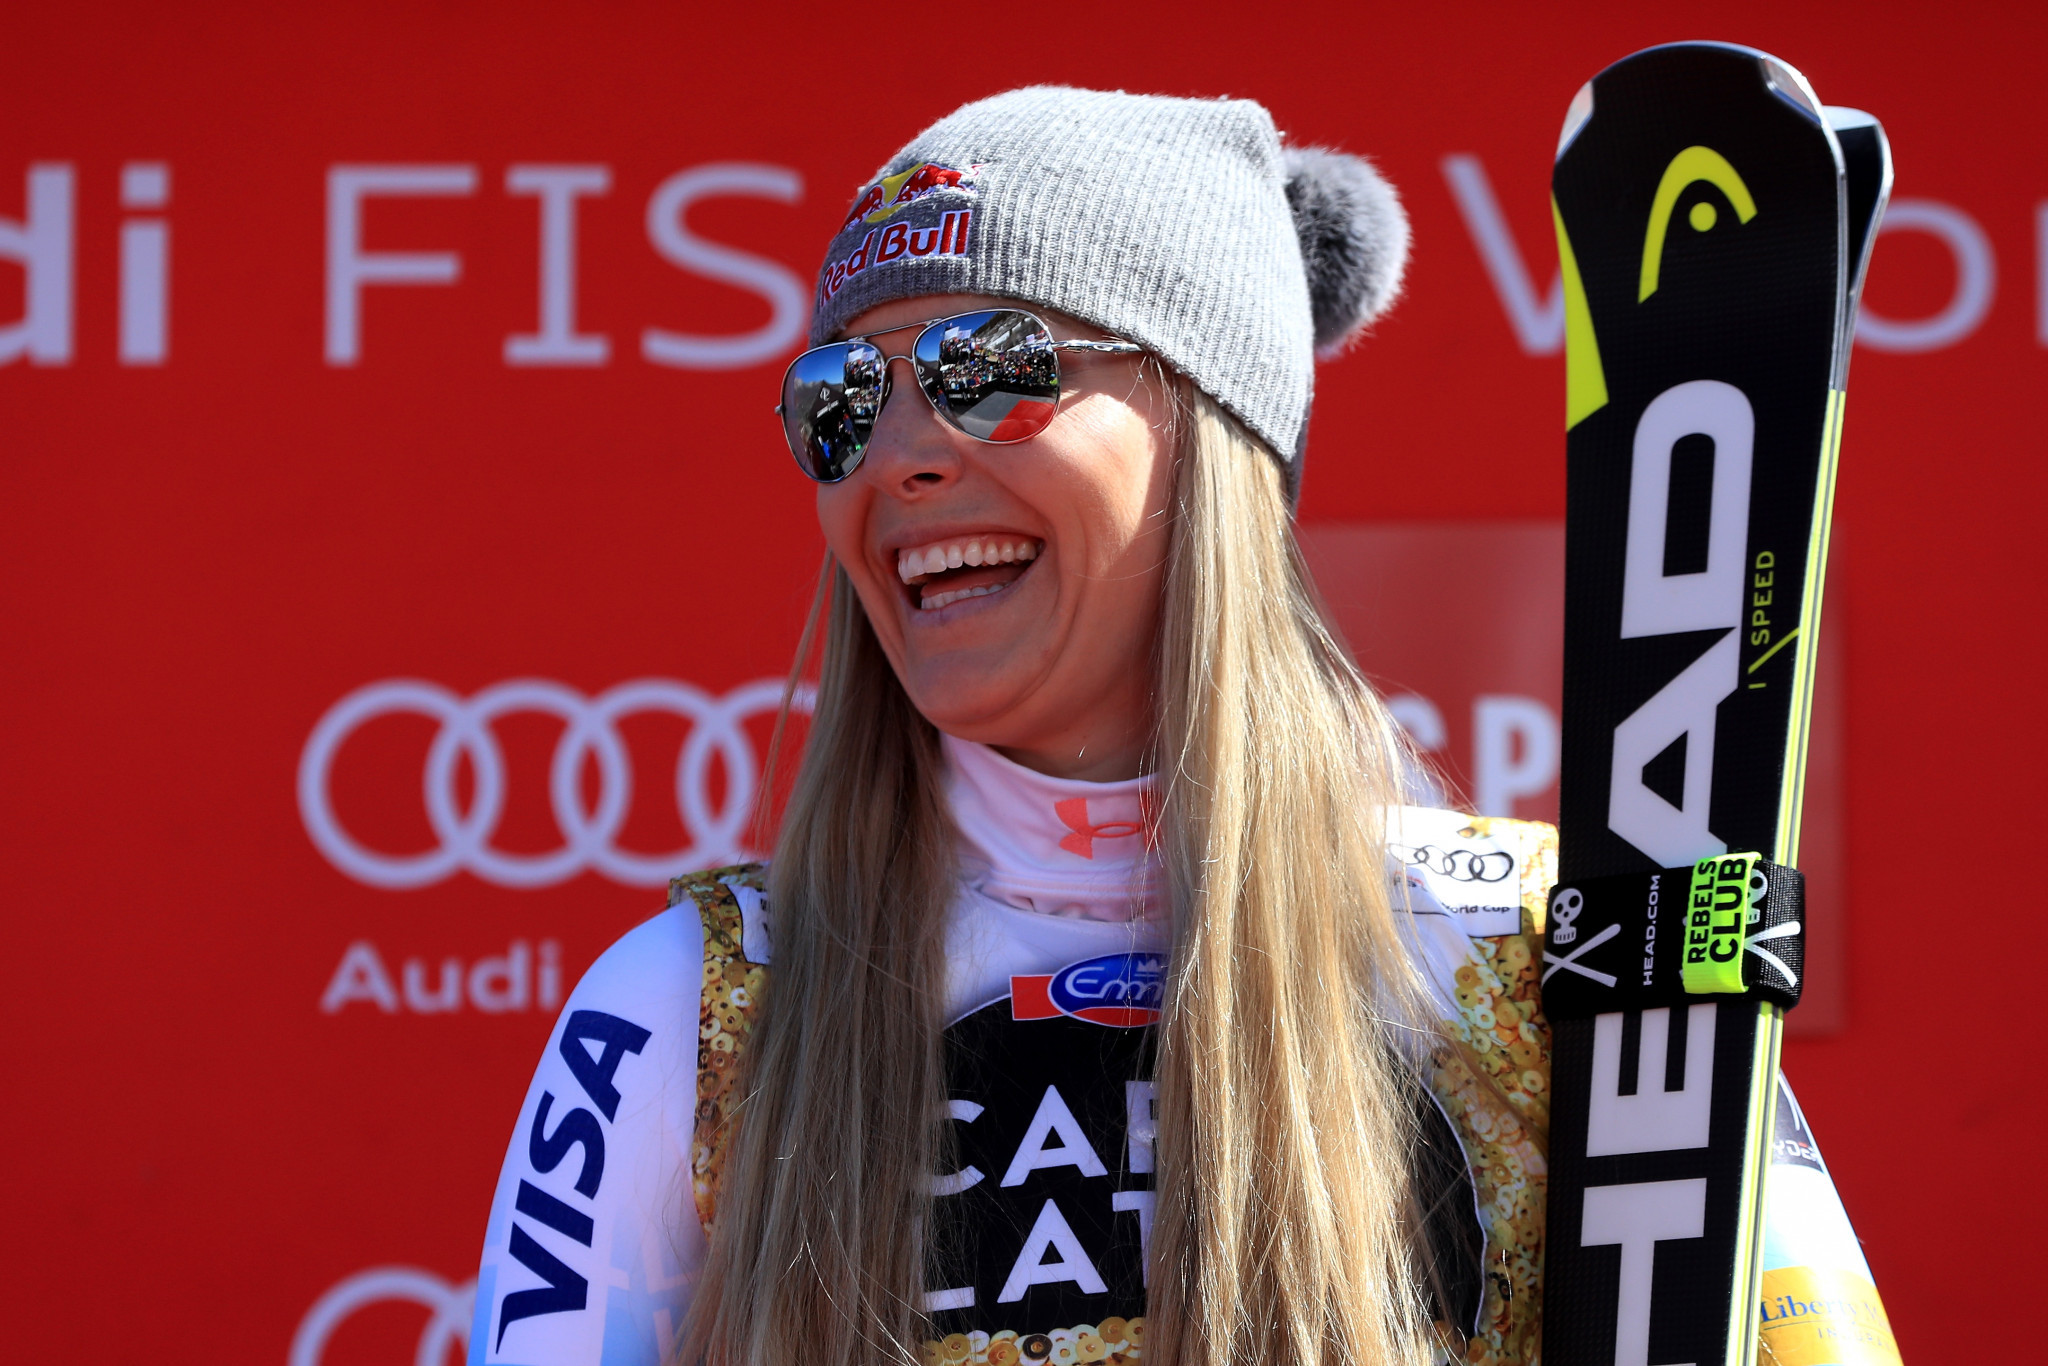 FIS put proposal to allow Vonn to compete against men on hold